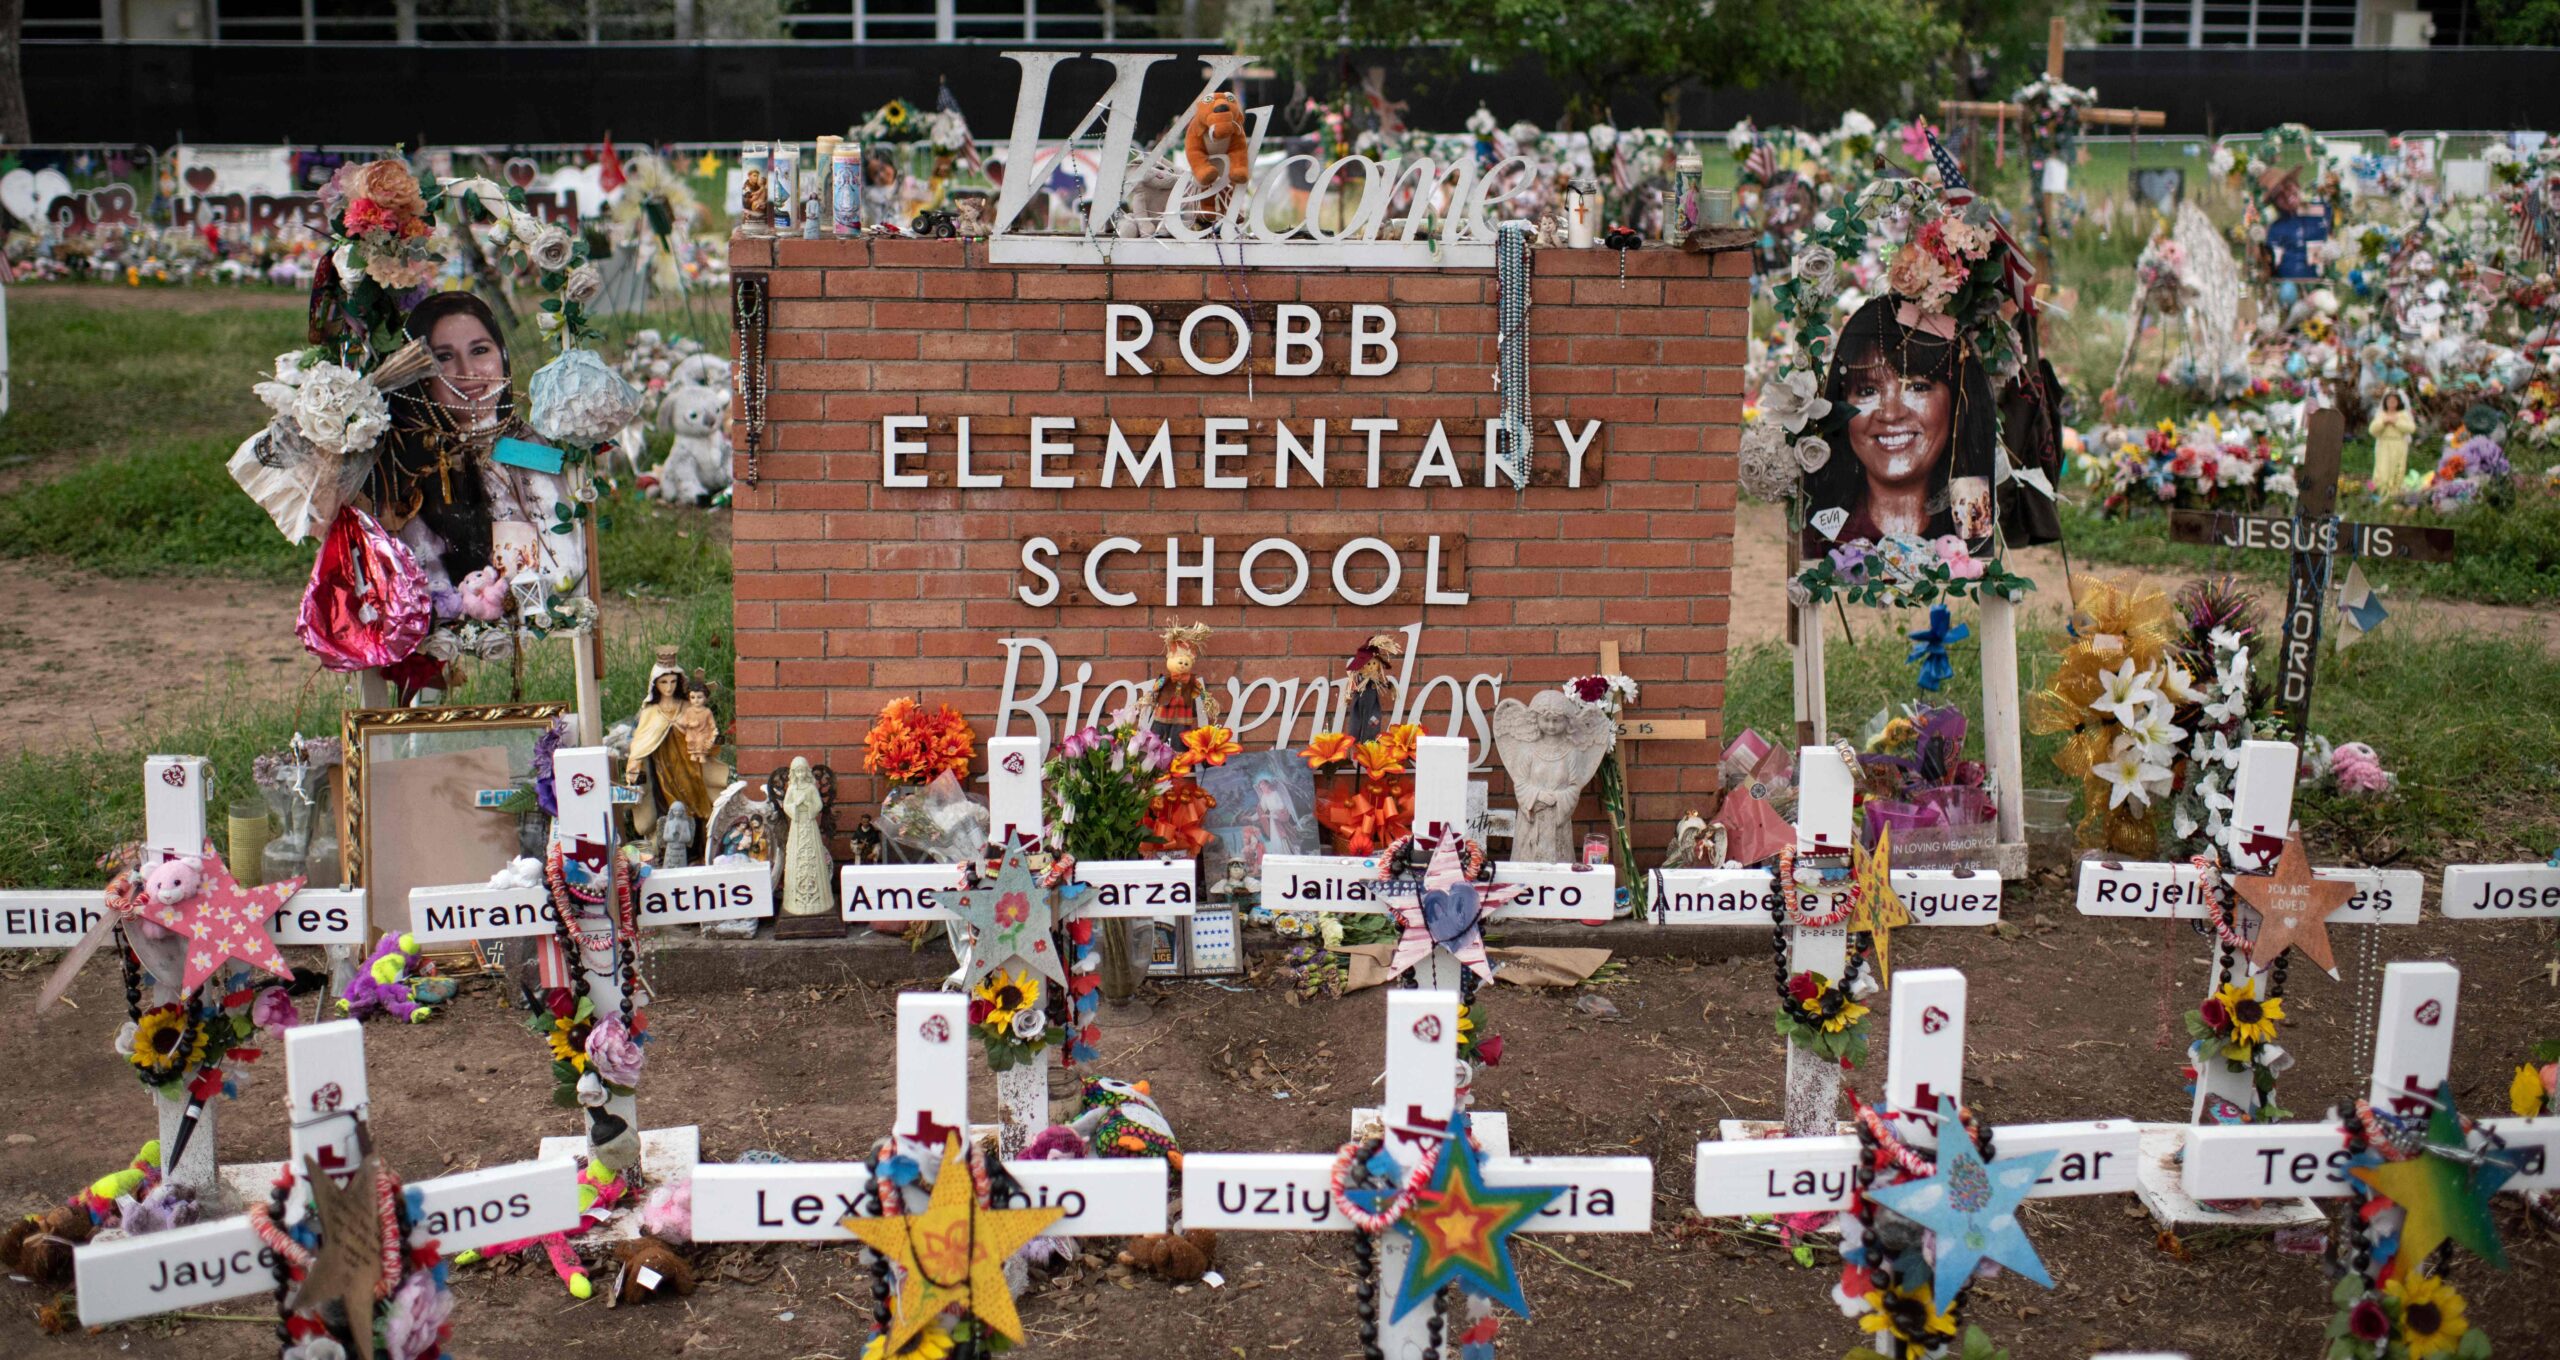 A brick welcome sign for Robb Elementary School. All around it are white crosses with the victims' names written on them, flowers, candles, and toys